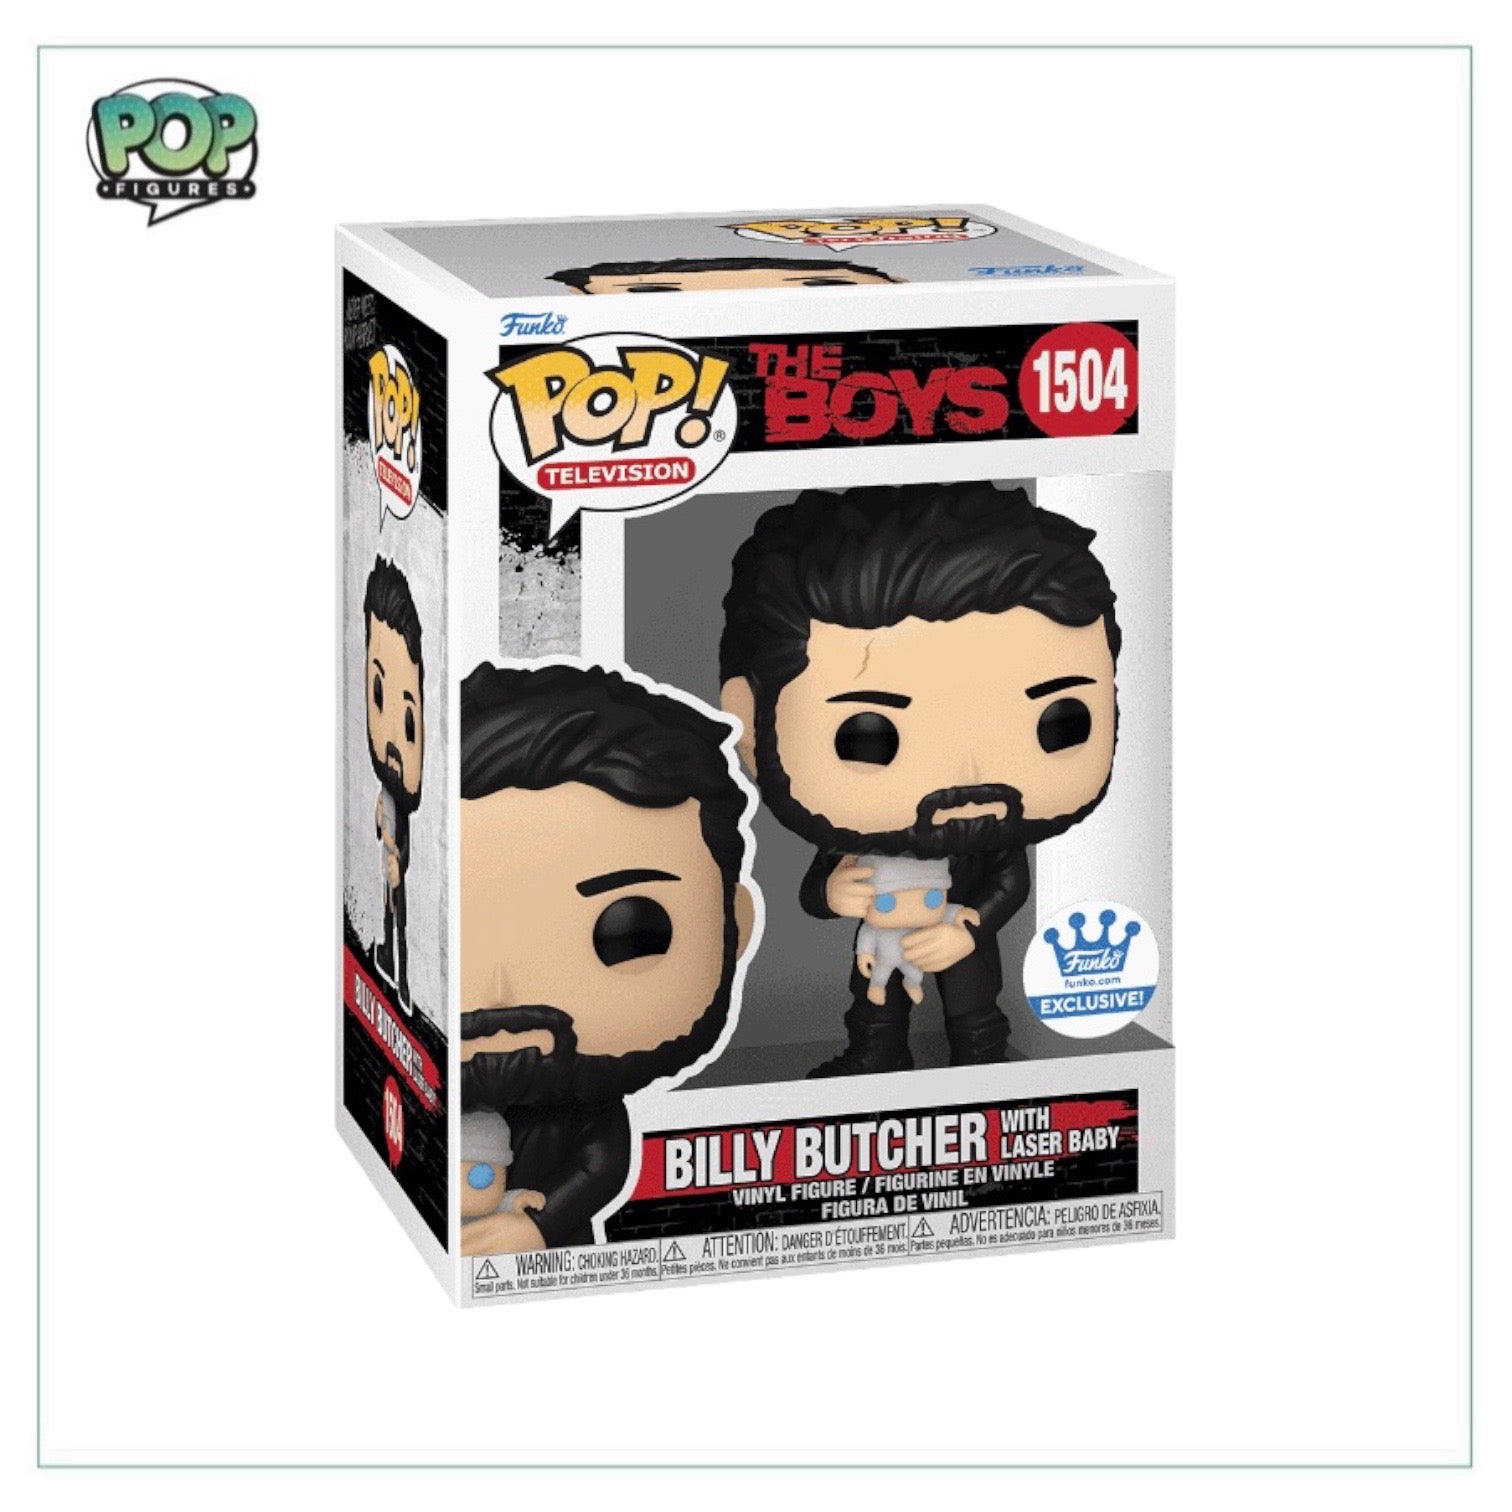 Billy Butcher with Laser Baby #1504 Funko Pop! - The Boys - Funko Shop Exclusive